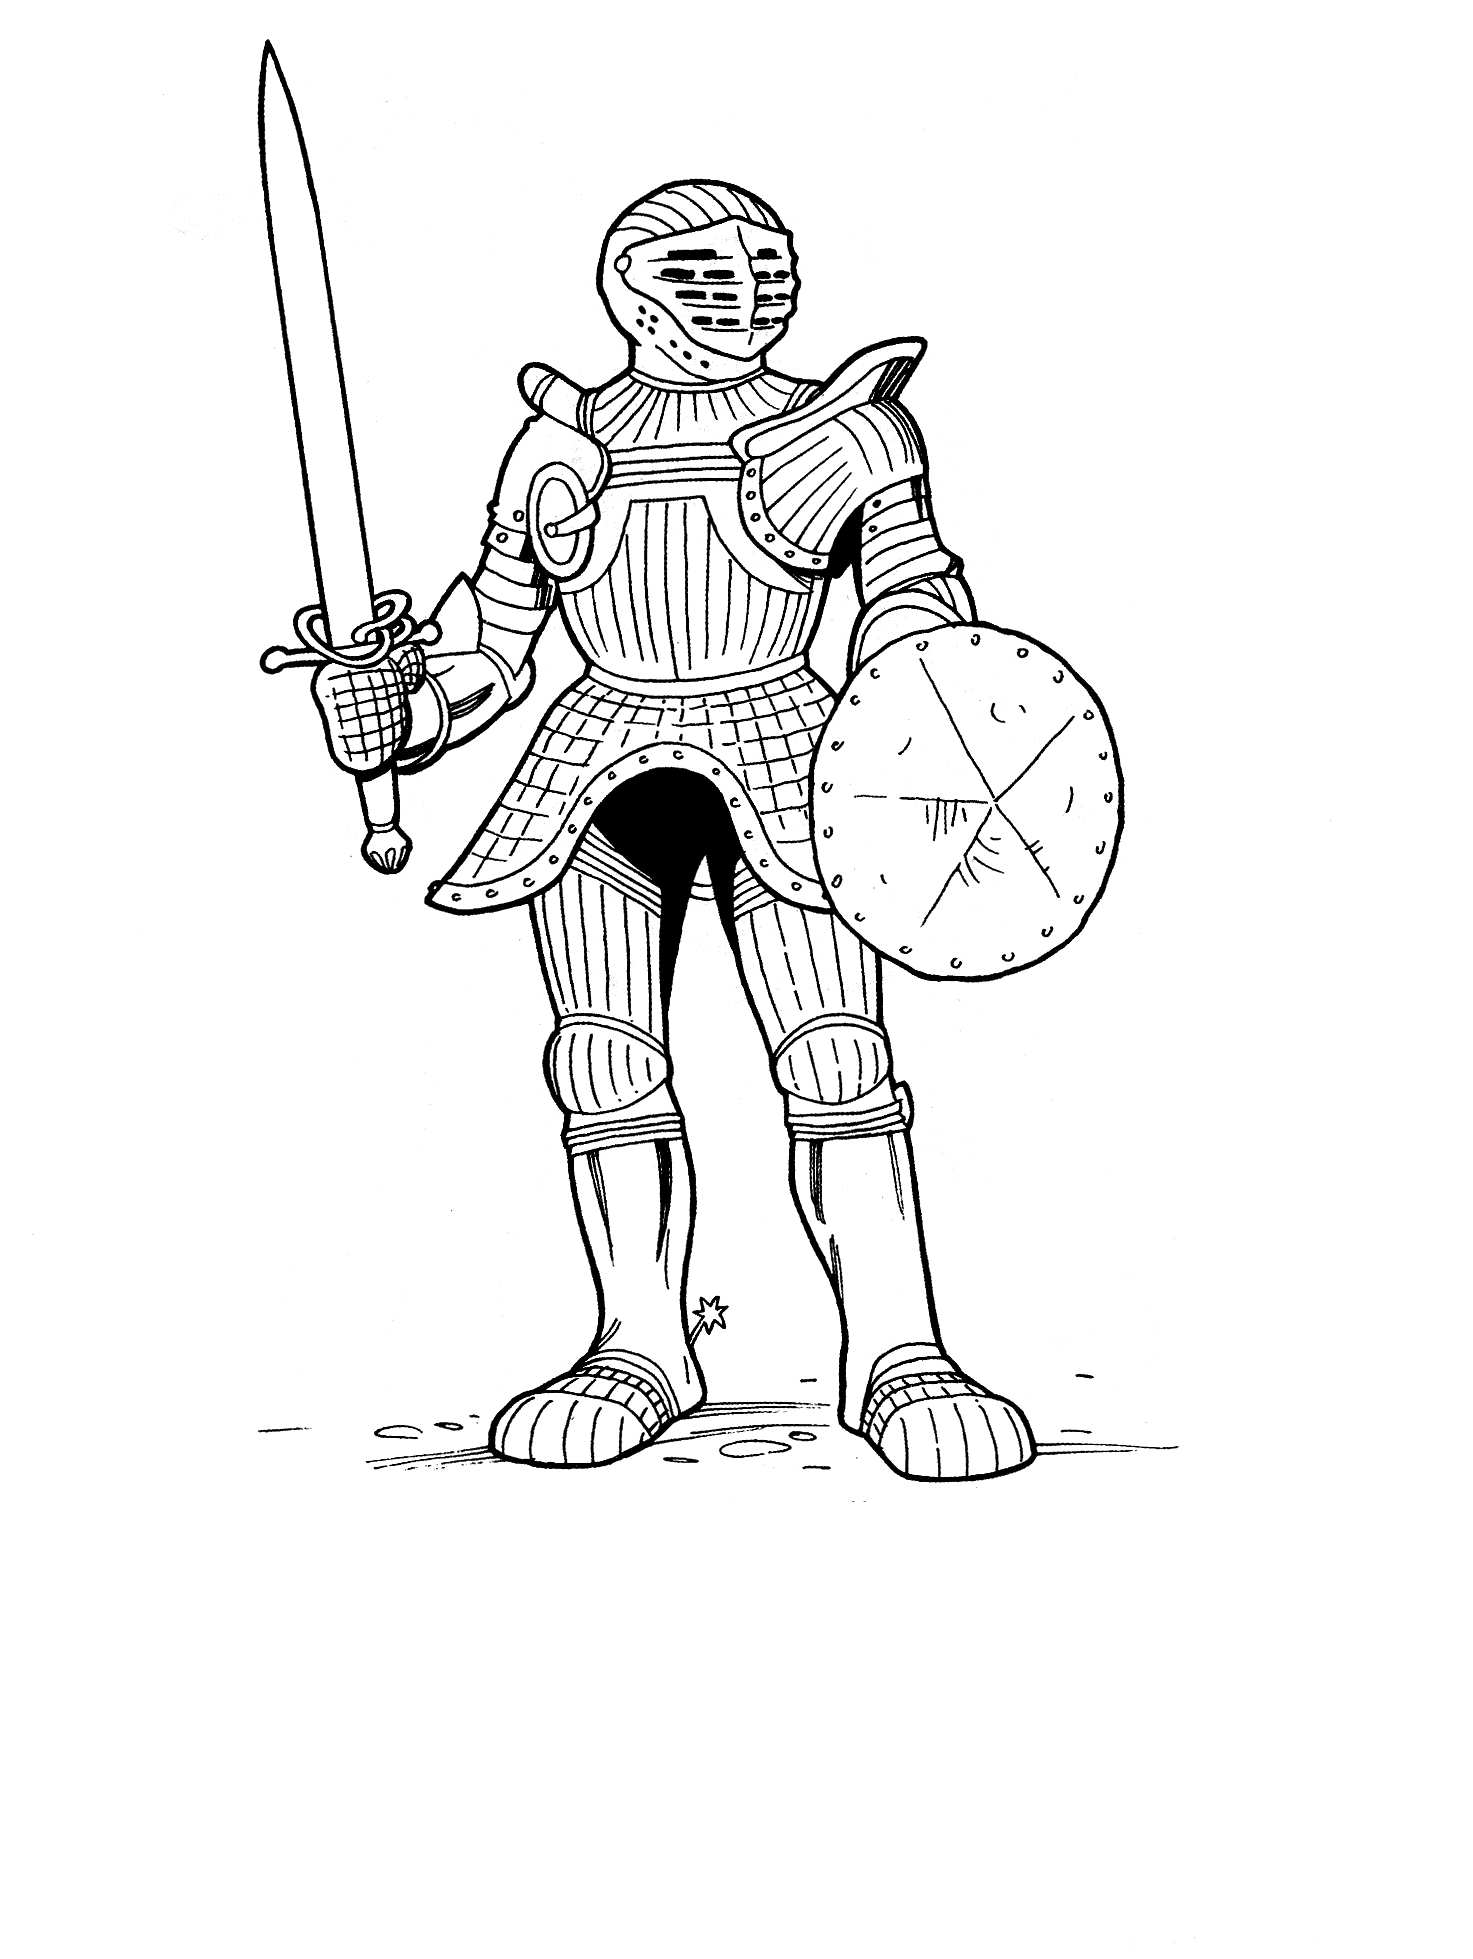 Coloring page - Armored Knight